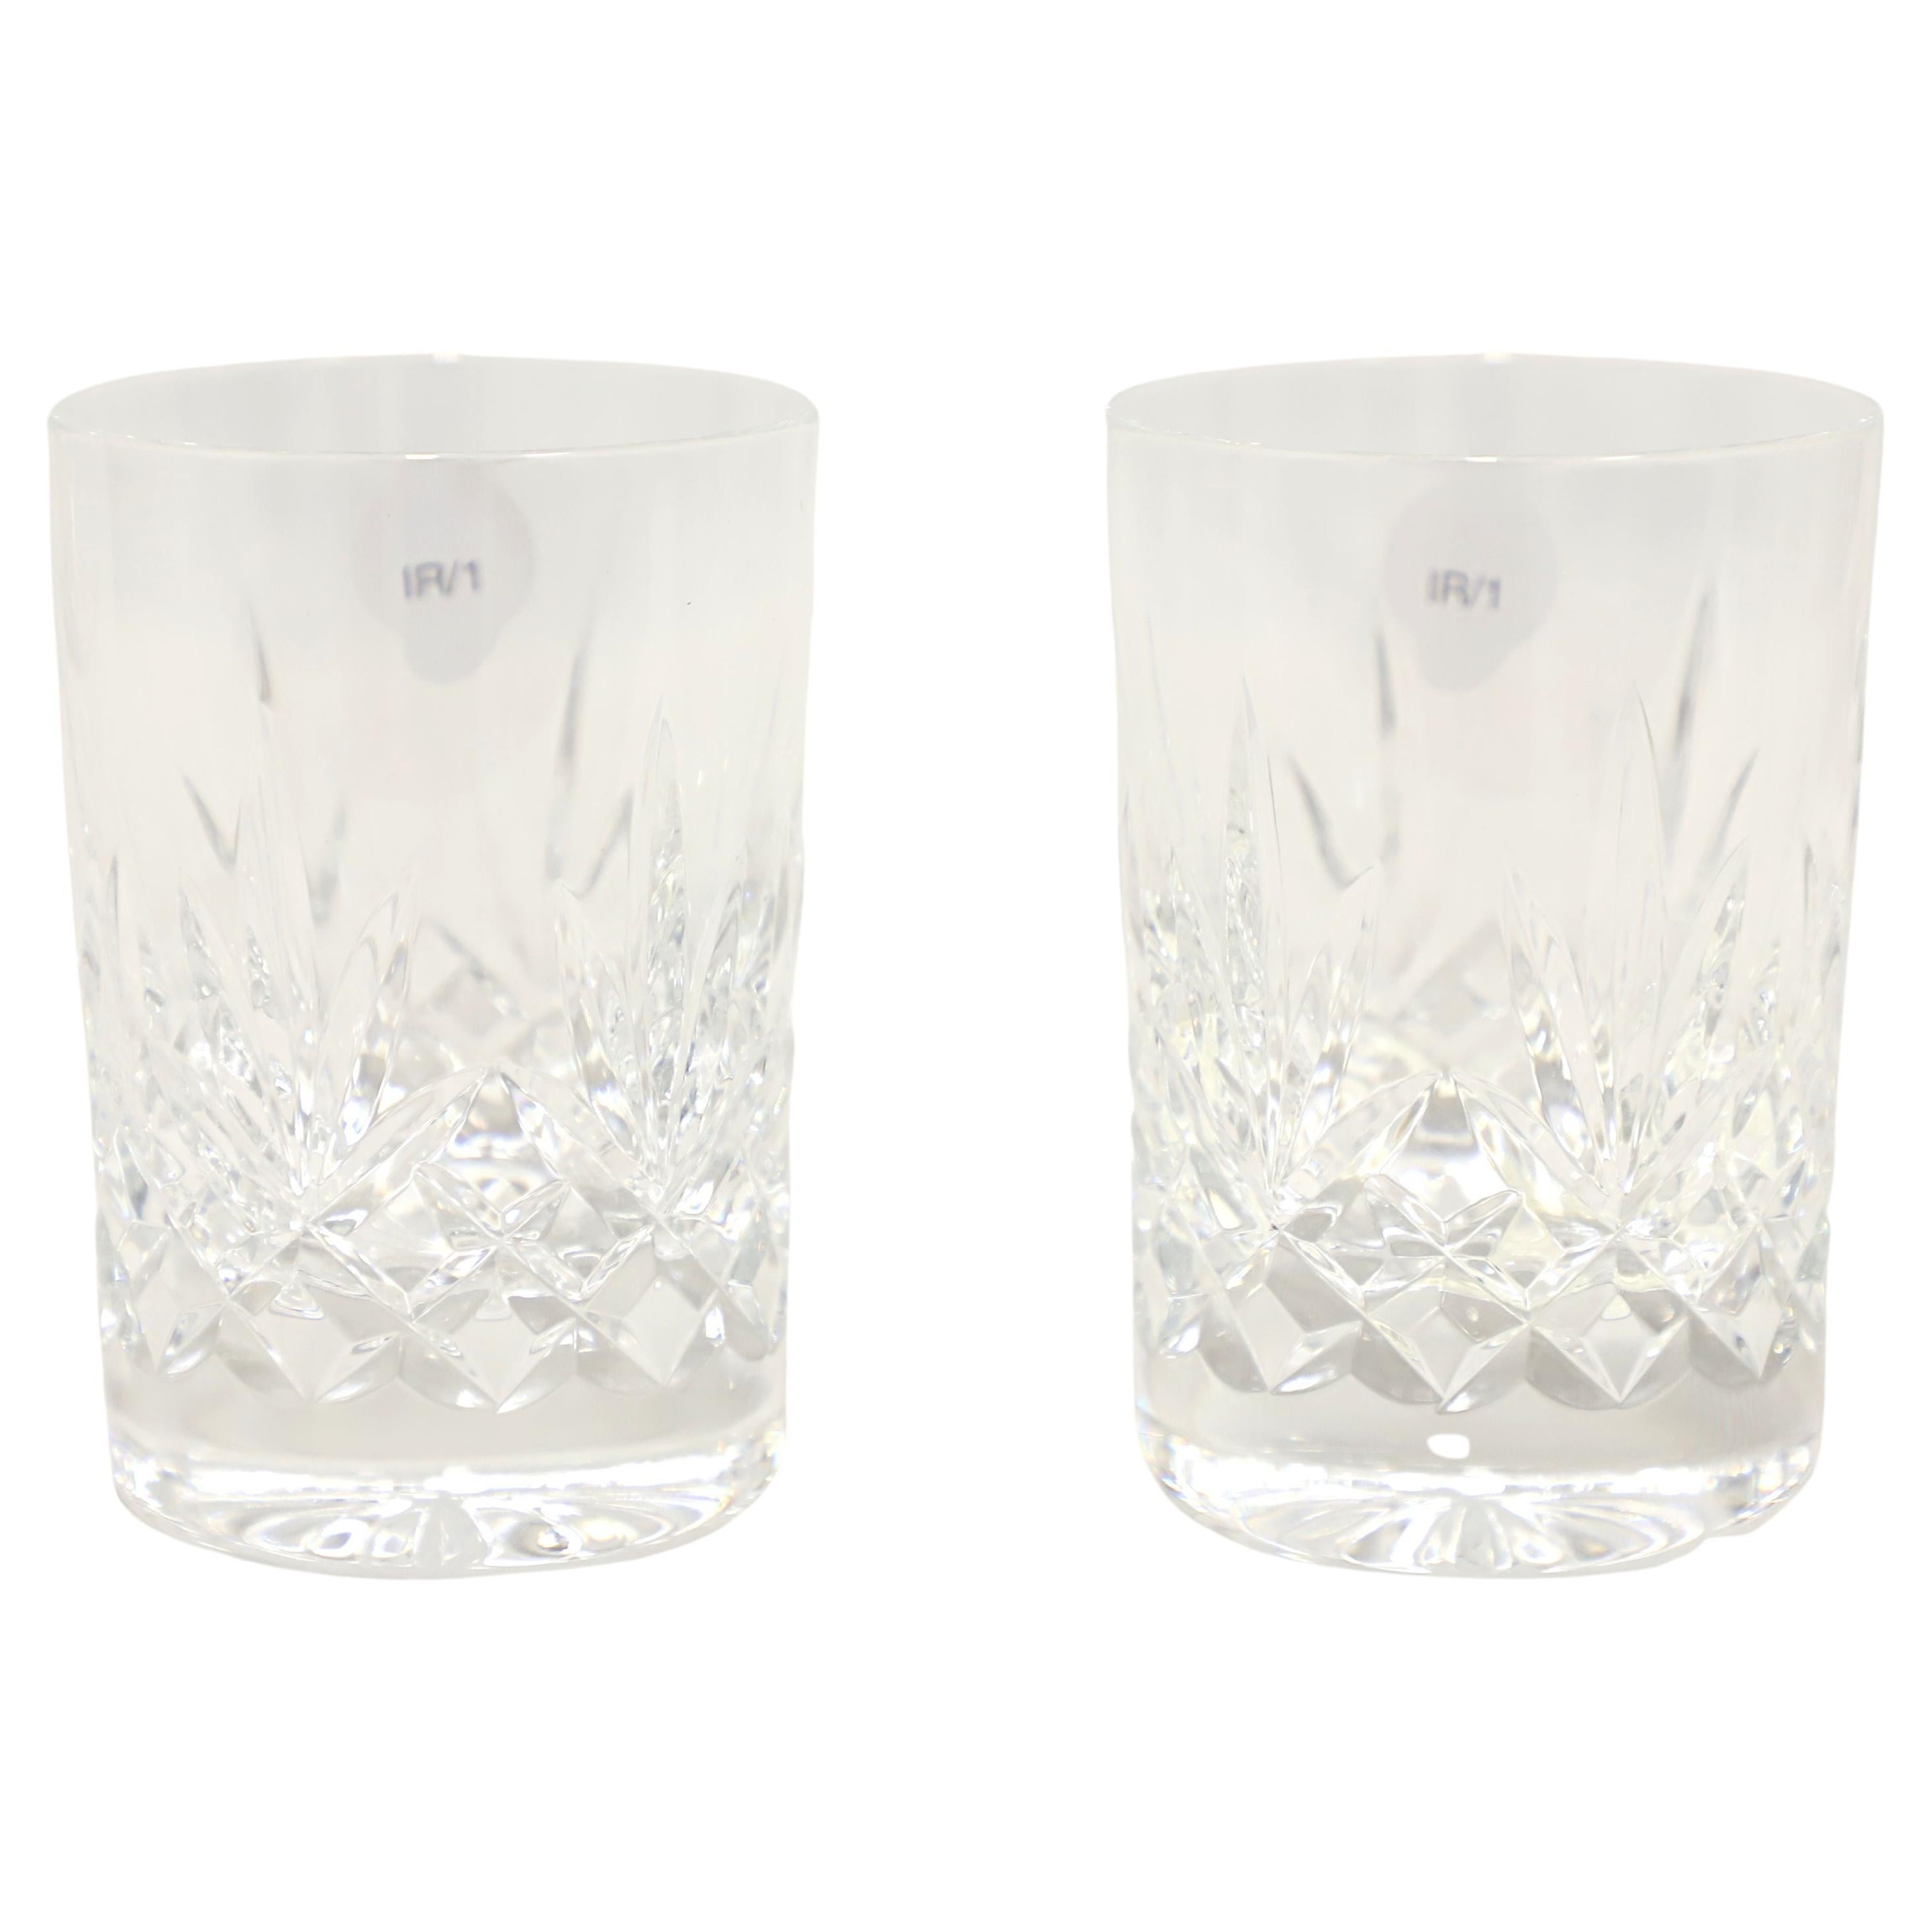 WATERFORD Crystal Ireland 4" Ferndale Juice Tumbler - Pair A *New in Open Box* For Sale